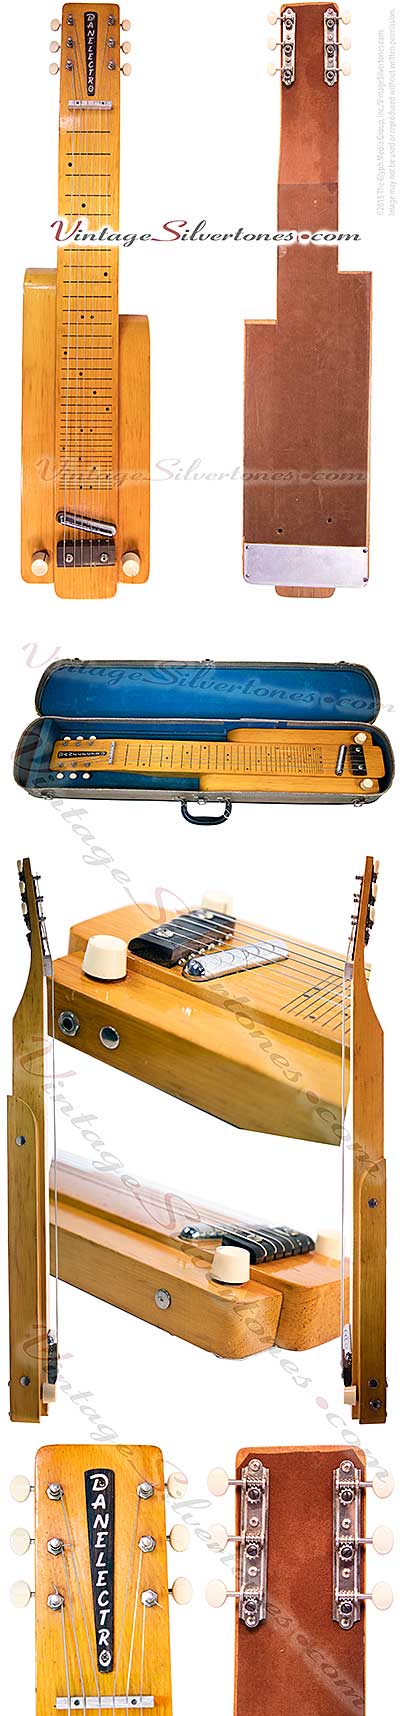 Danelectro - S61 1 lipstick tube-style pickup, natural finish lap steel electric guitar made in Neptune, NY, USA circa 1958